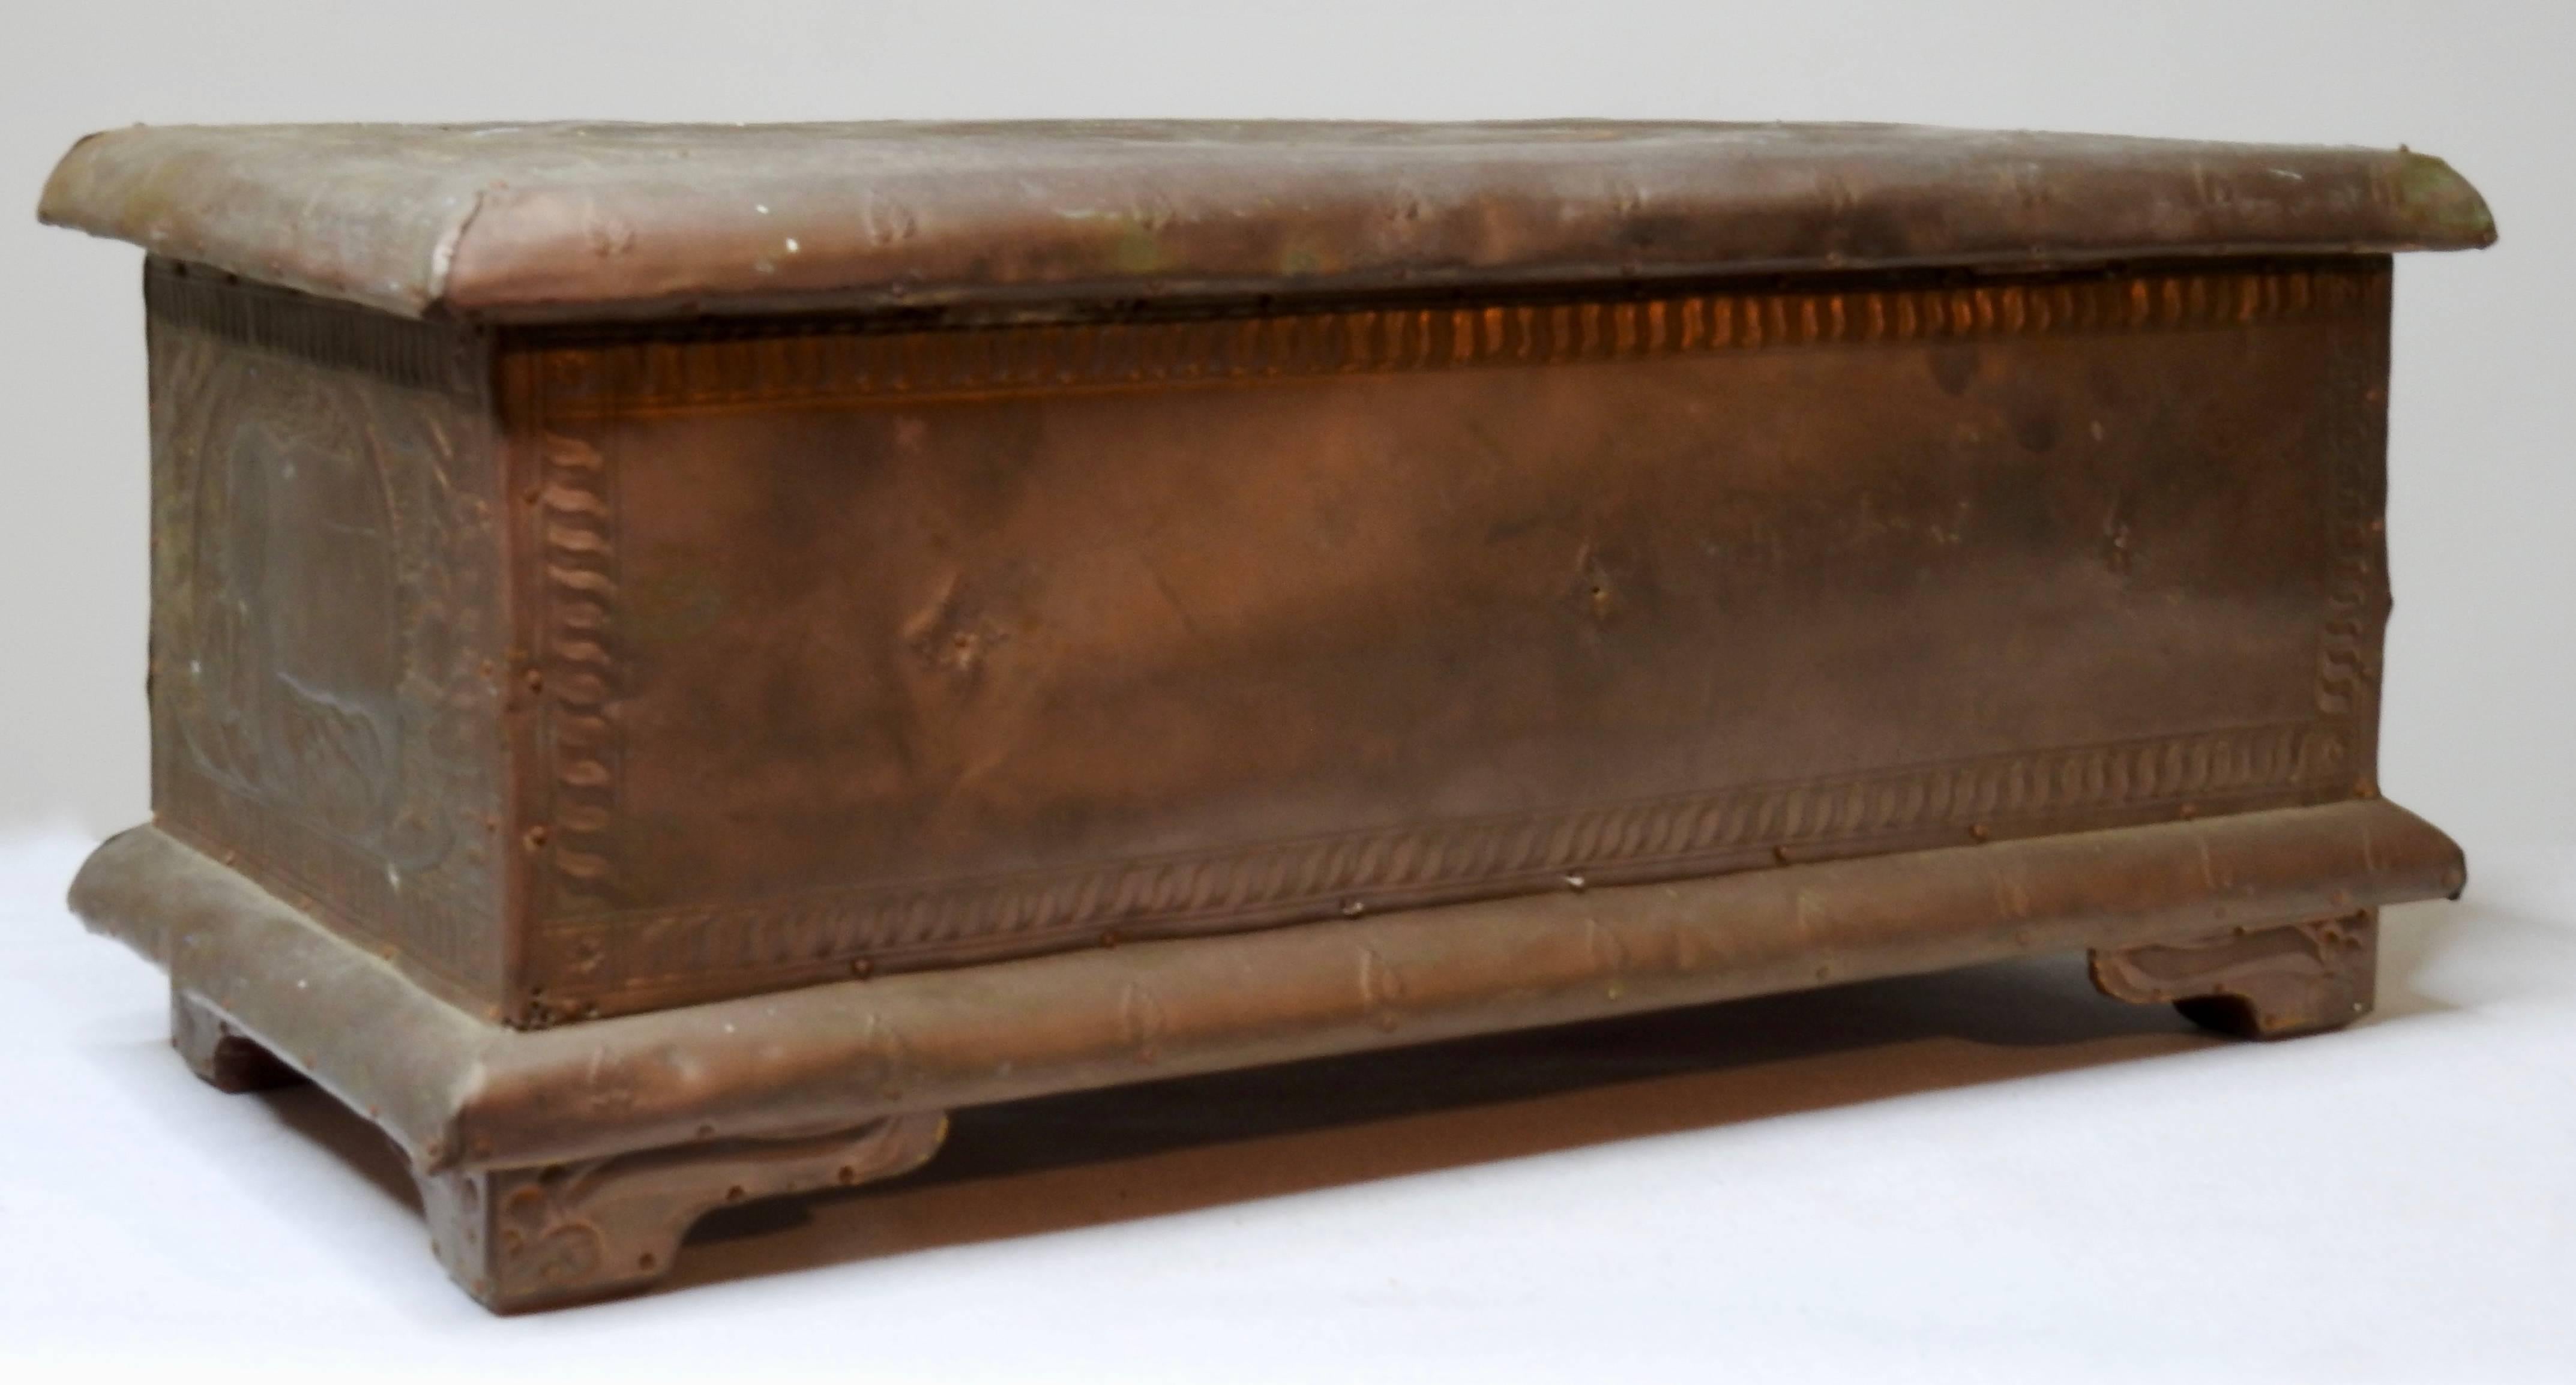 This cherrywood box is covered in a pressed copper with animal figures and foliate detailing. When open the box shows its beautiful warm toned wood with a compartment to the right side. The box has the original key.